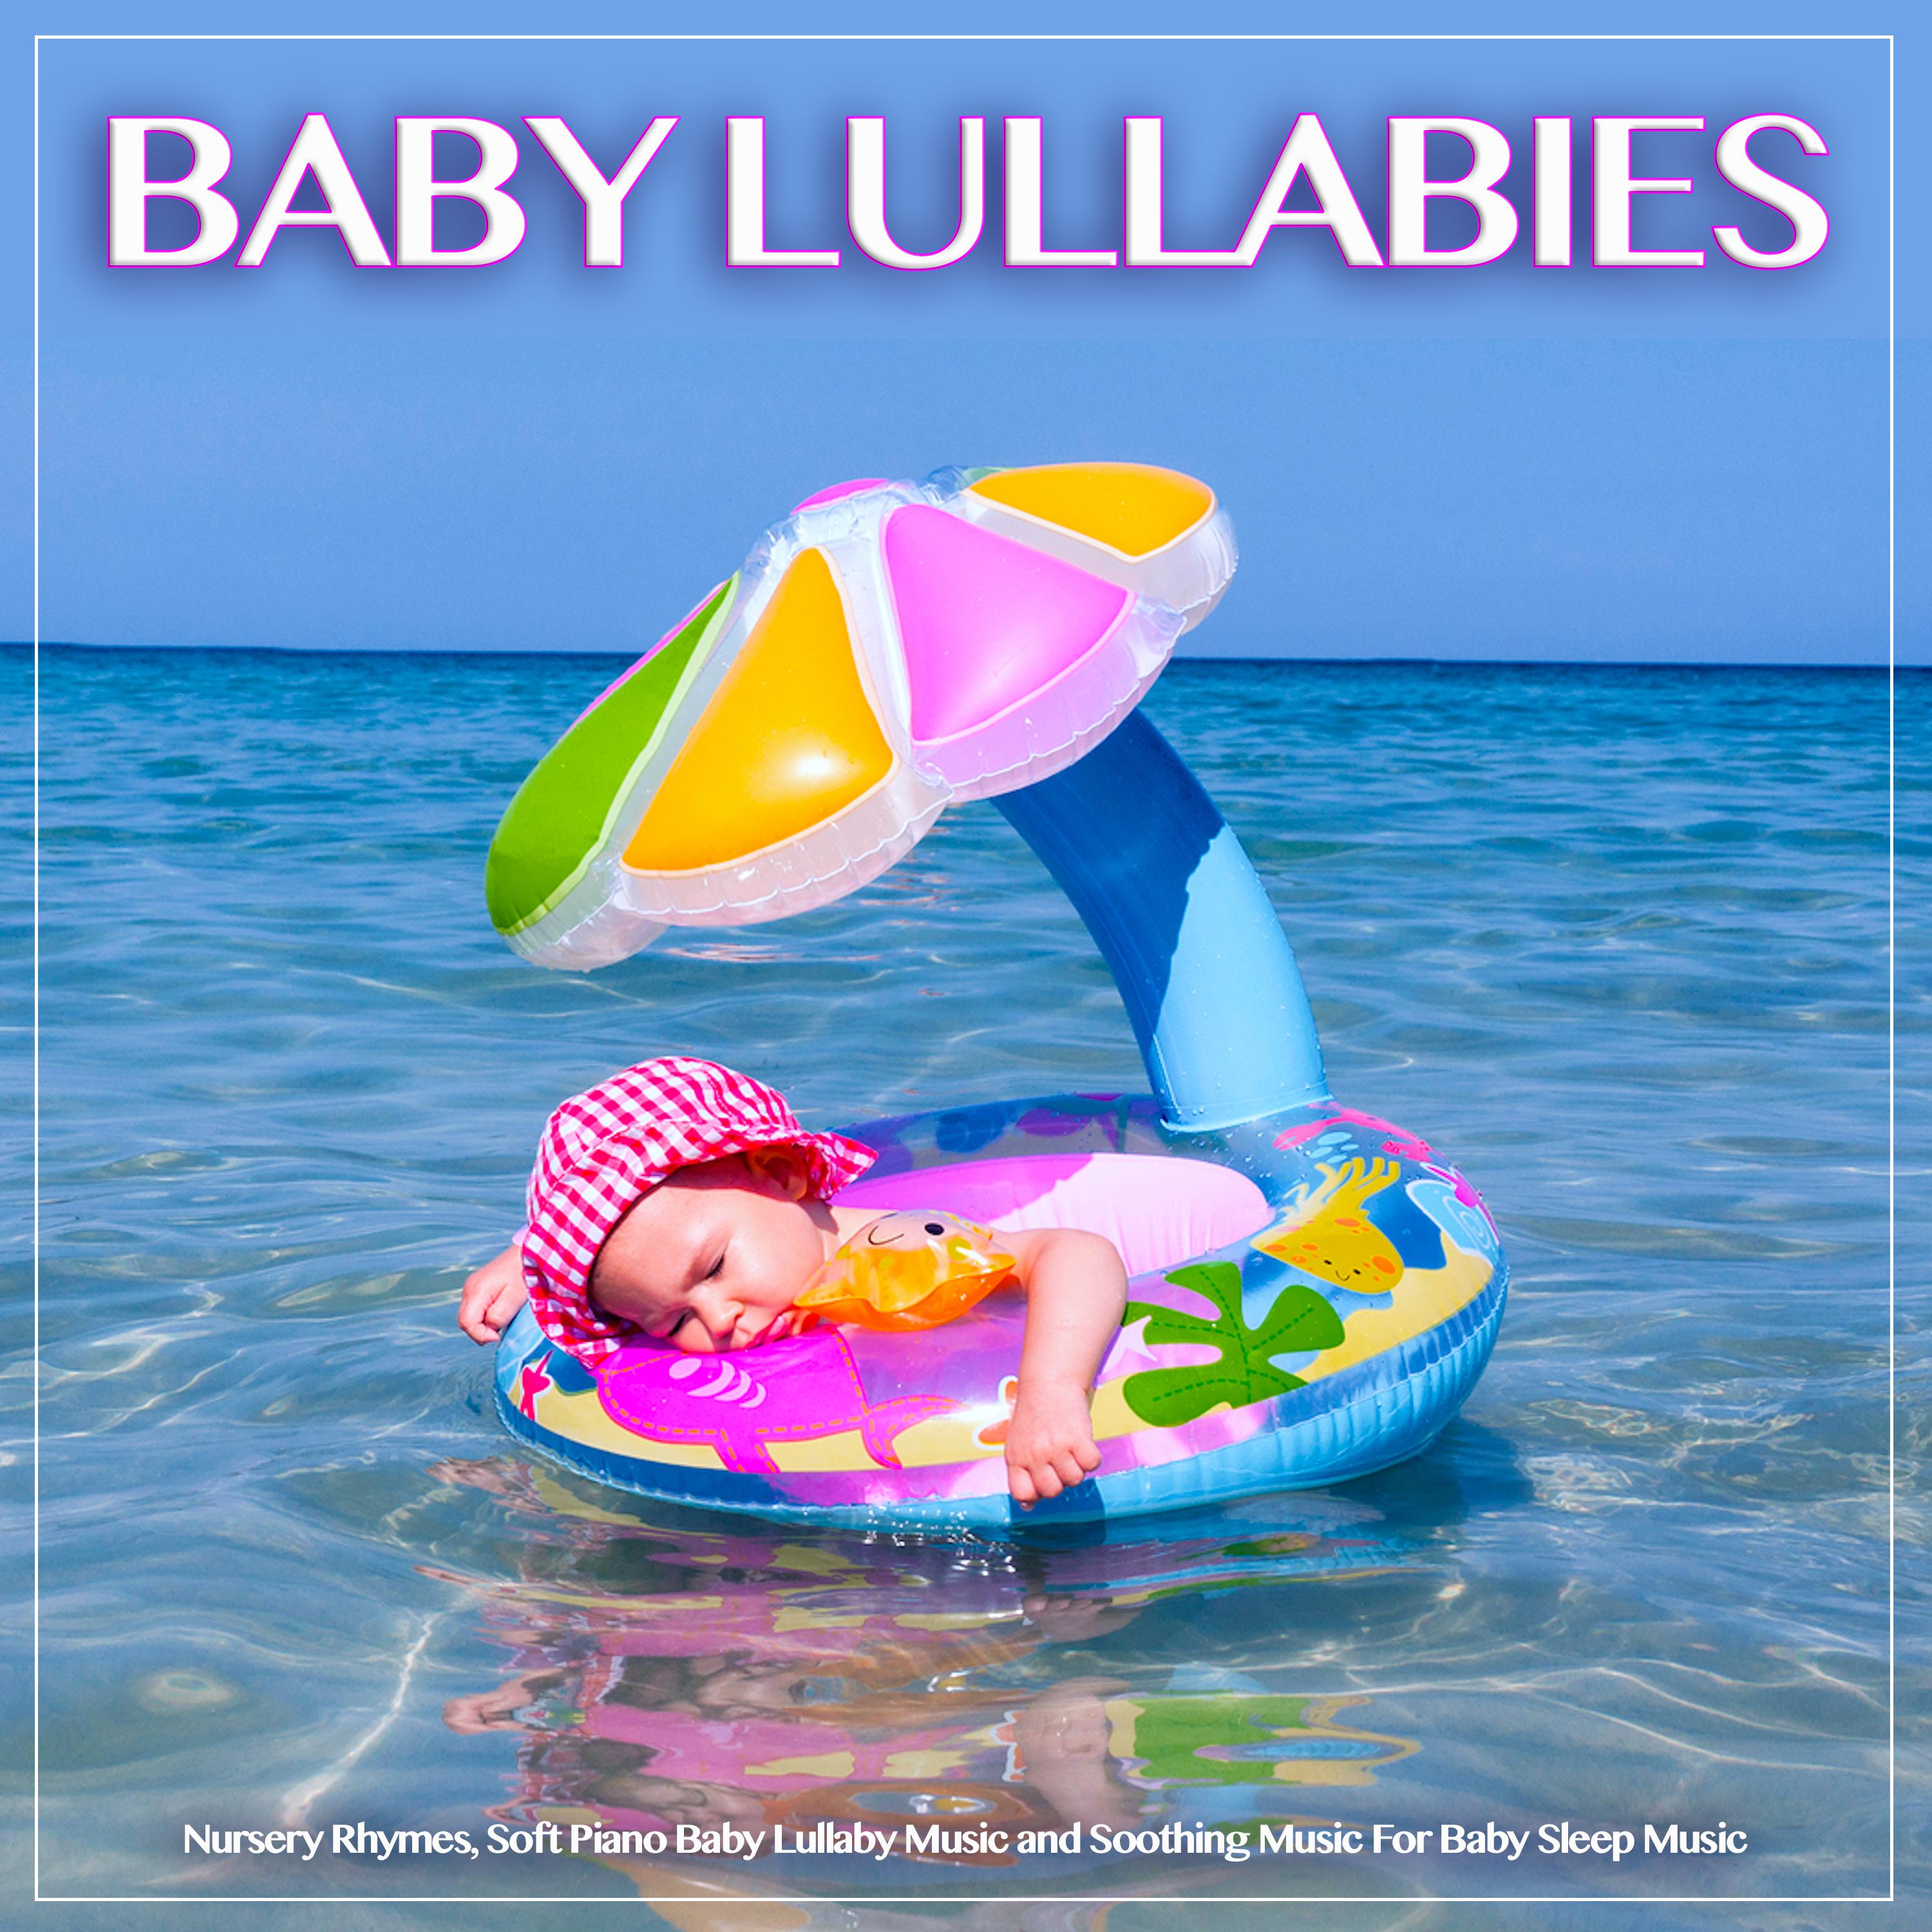 Baby Lullabies: Nursery Rhymes, Soft Piano Baby Lullaby Music and Soothing Music For Baby Sleep Music